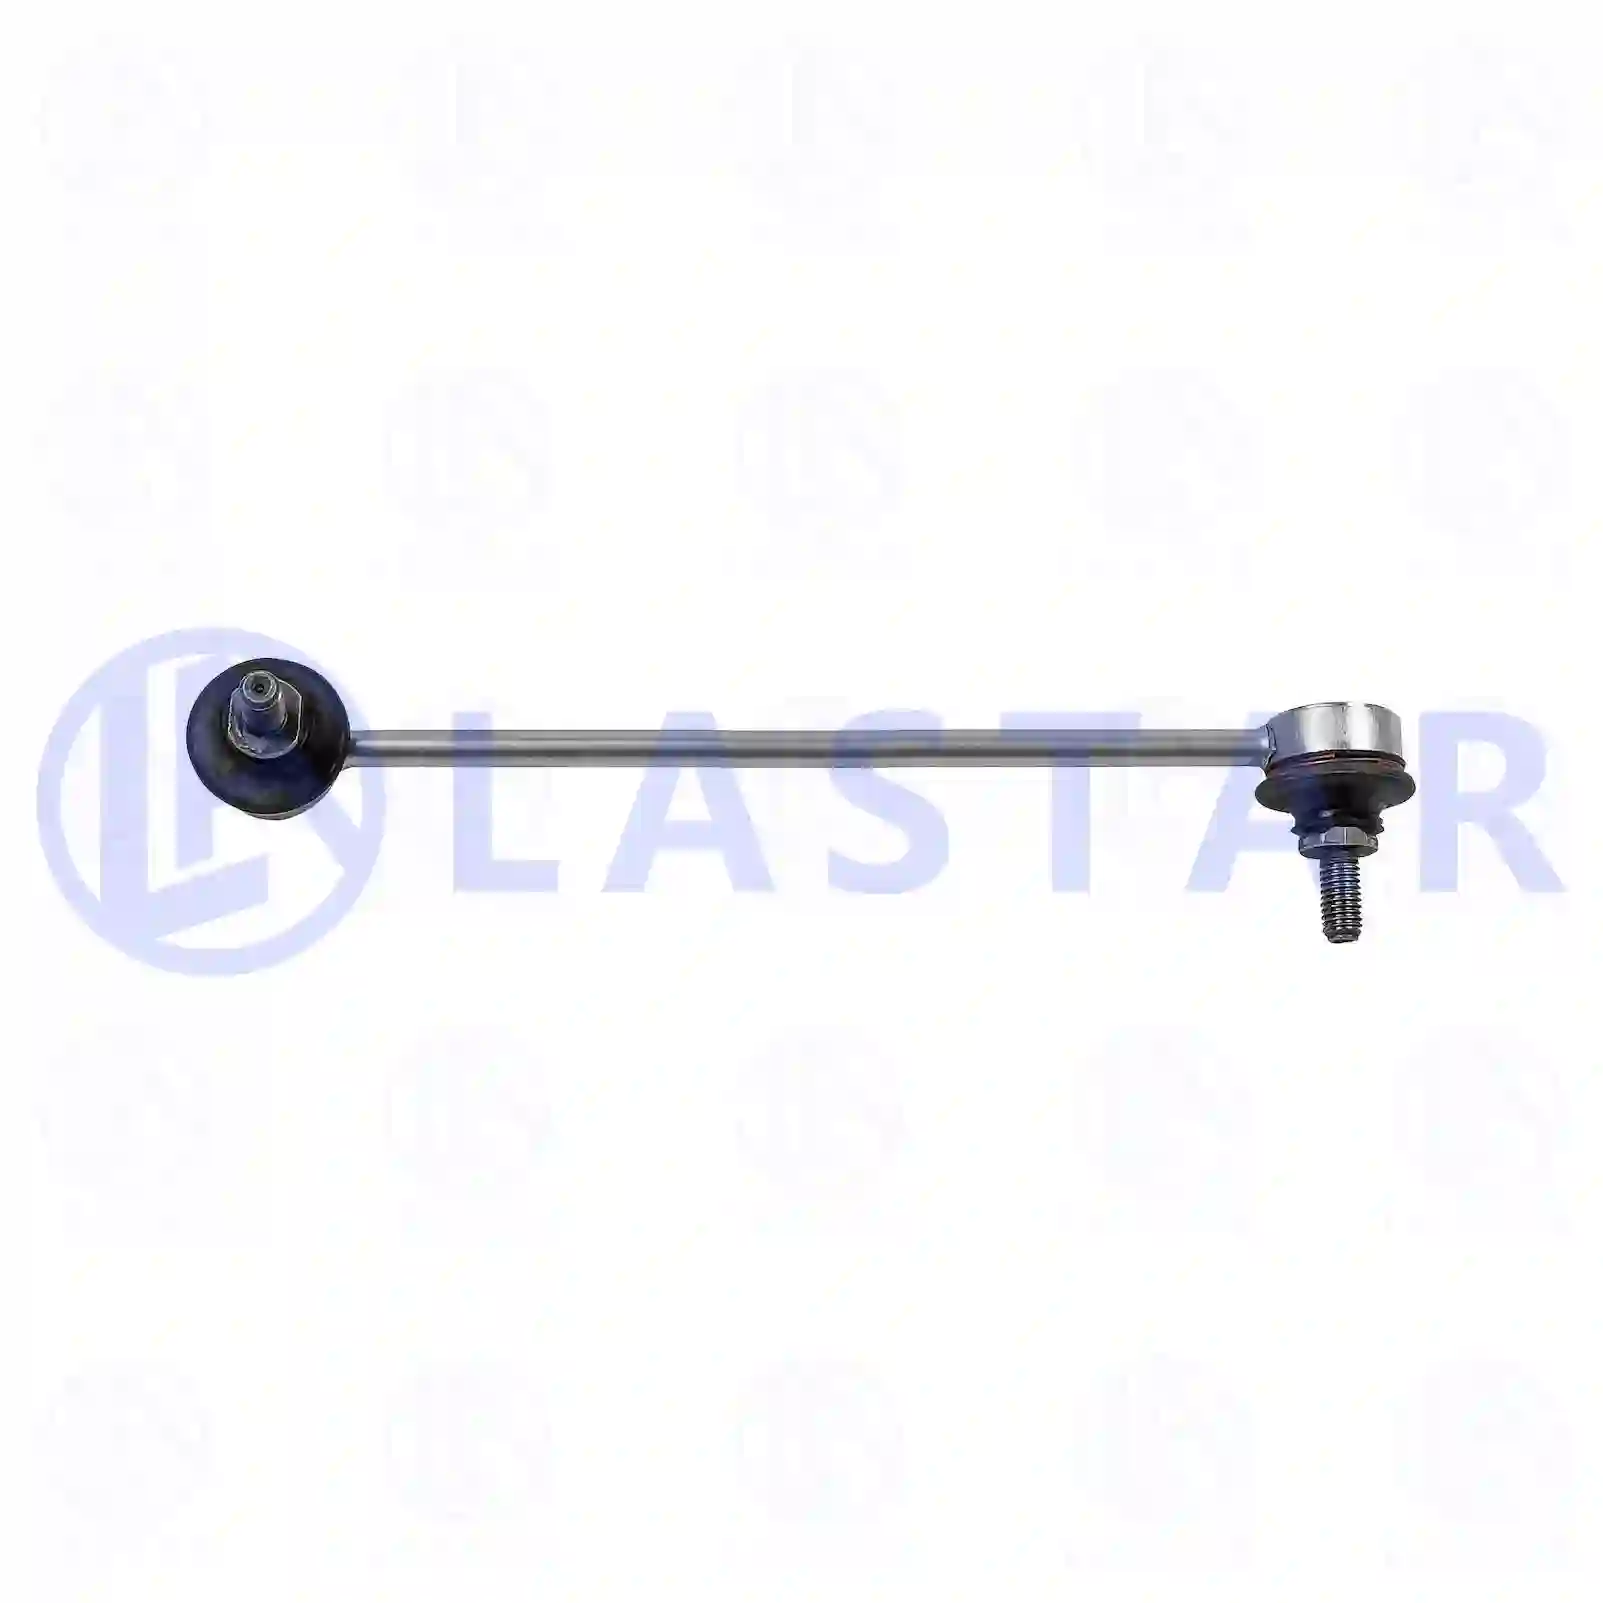 Stabilizer stay, right, 77727984, 6383230368 ||  77727984 Lastar Spare Part | Truck Spare Parts, Auotomotive Spare Parts Stabilizer stay, right, 77727984, 6383230368 ||  77727984 Lastar Spare Part | Truck Spare Parts, Auotomotive Spare Parts